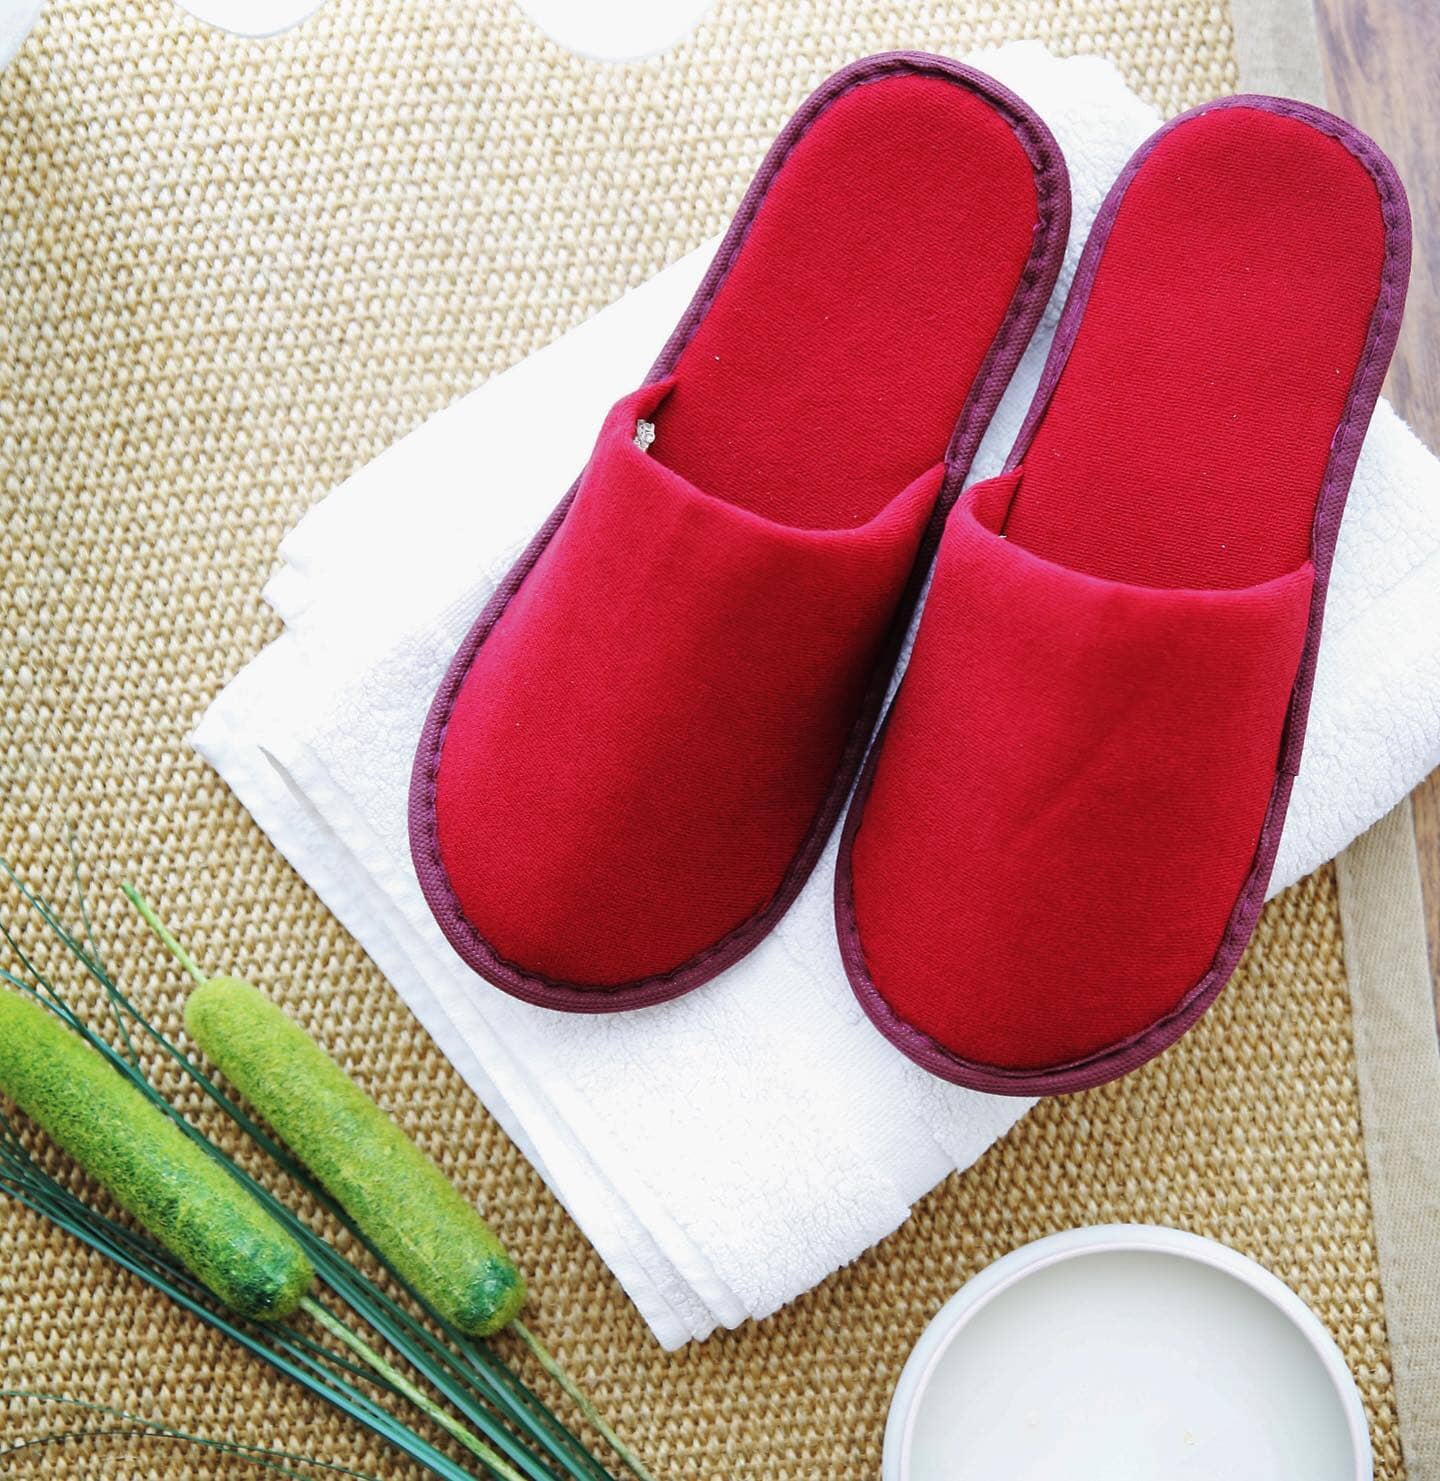 Chochili 150 Pairs Fabric Packed Terry Cotton Disposable Slippers for Airbnb Spa Wedding Guests Adult Men Women Size 10-11, White Disposable Slippers supplyity 